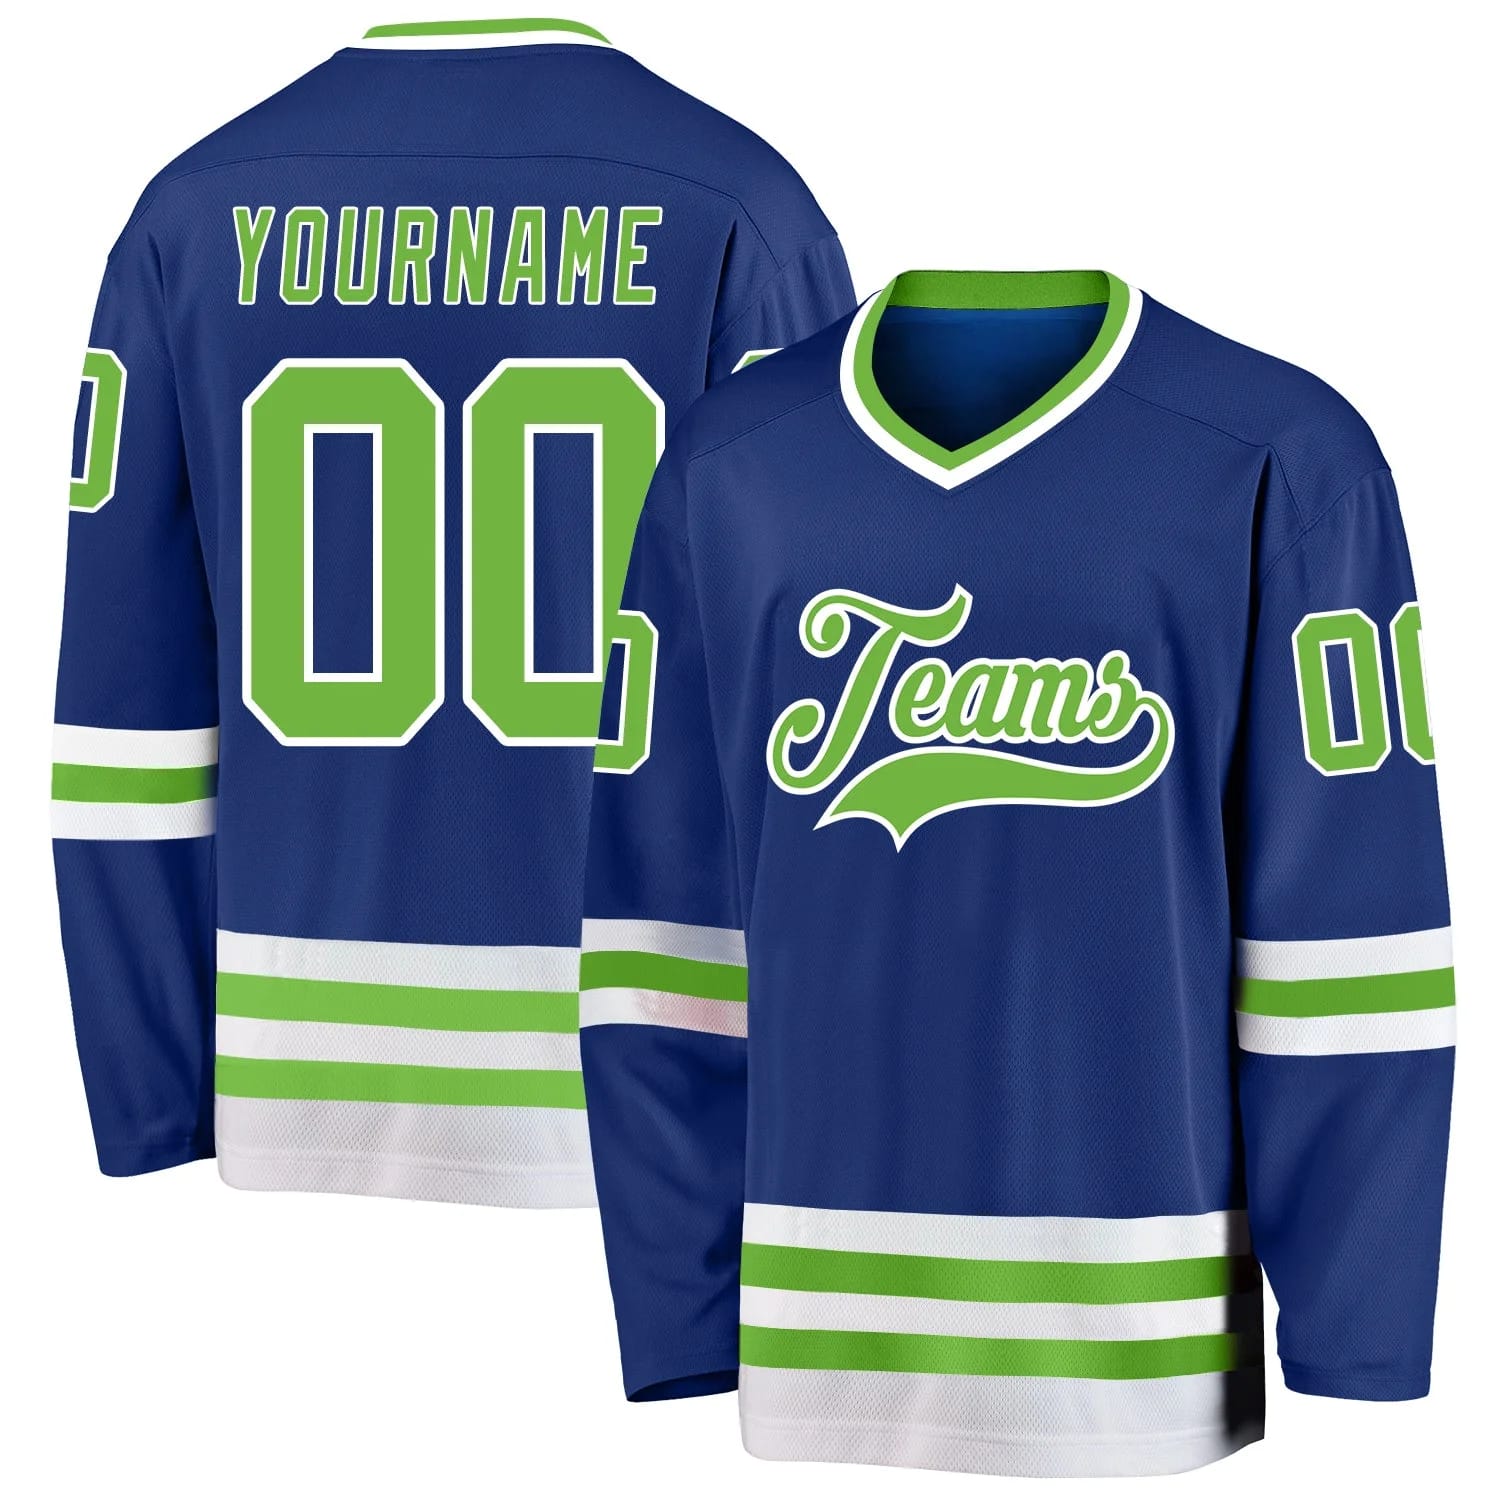 Stitched And Print Royal Neon Green-white Hockey Jersey Custom